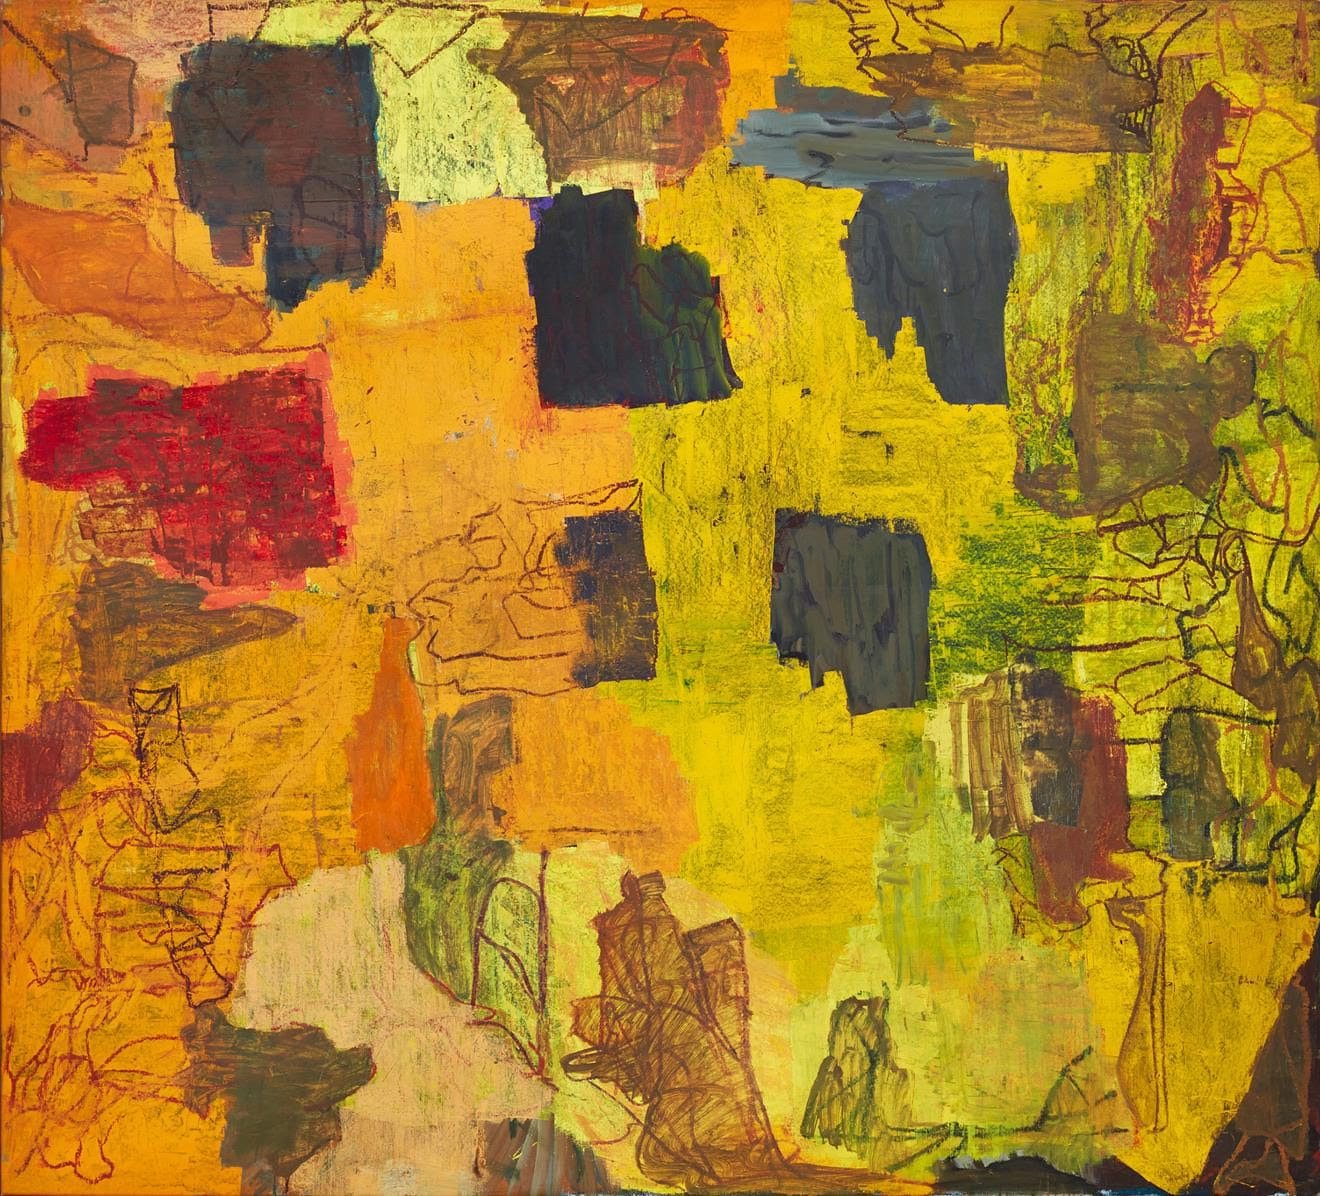 Per Kirkeby, “Untitled”, 1995 Oil on canvas 78 3/4 x 86 1/2 inches (200 x 220 cm)